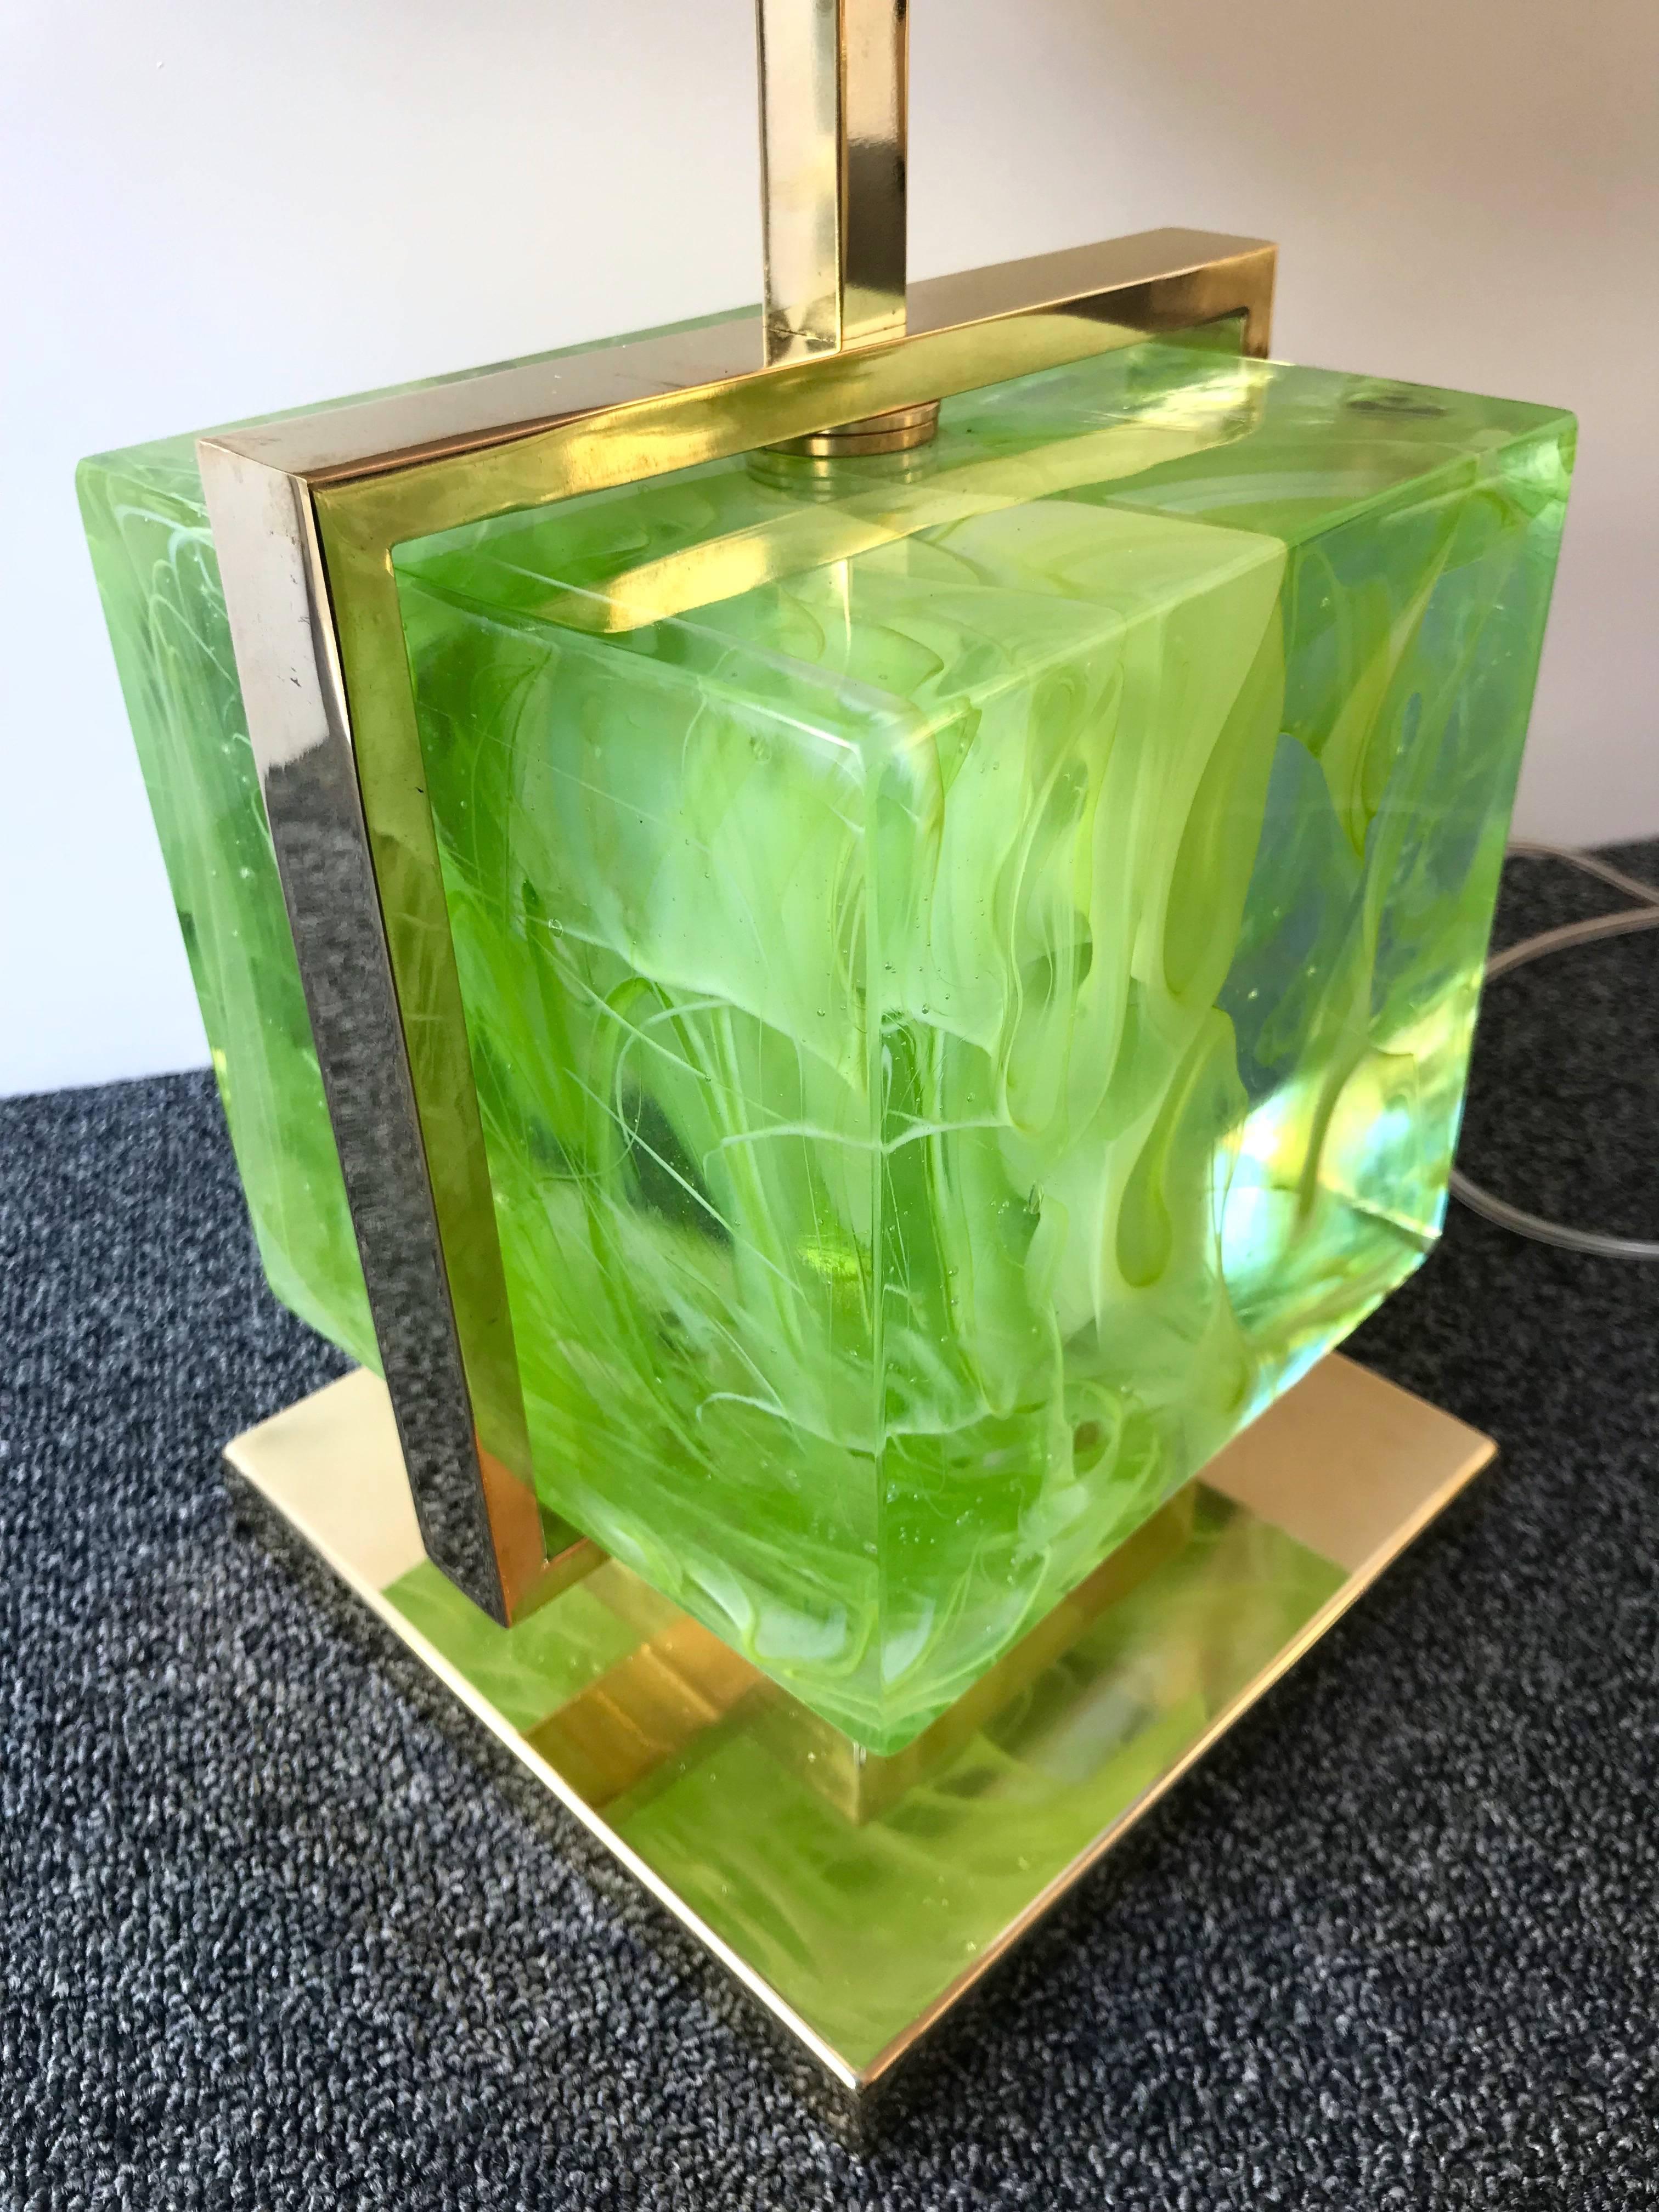 Very fresh pair of brass cage lamps with an impressive and massive green Murano pressed glass cube. Base lamps. Demonstration shades no include. Yellow, red lamps are available on my storefront. In the style of Mazzega, Poliarte, Venini, Vistosi, La